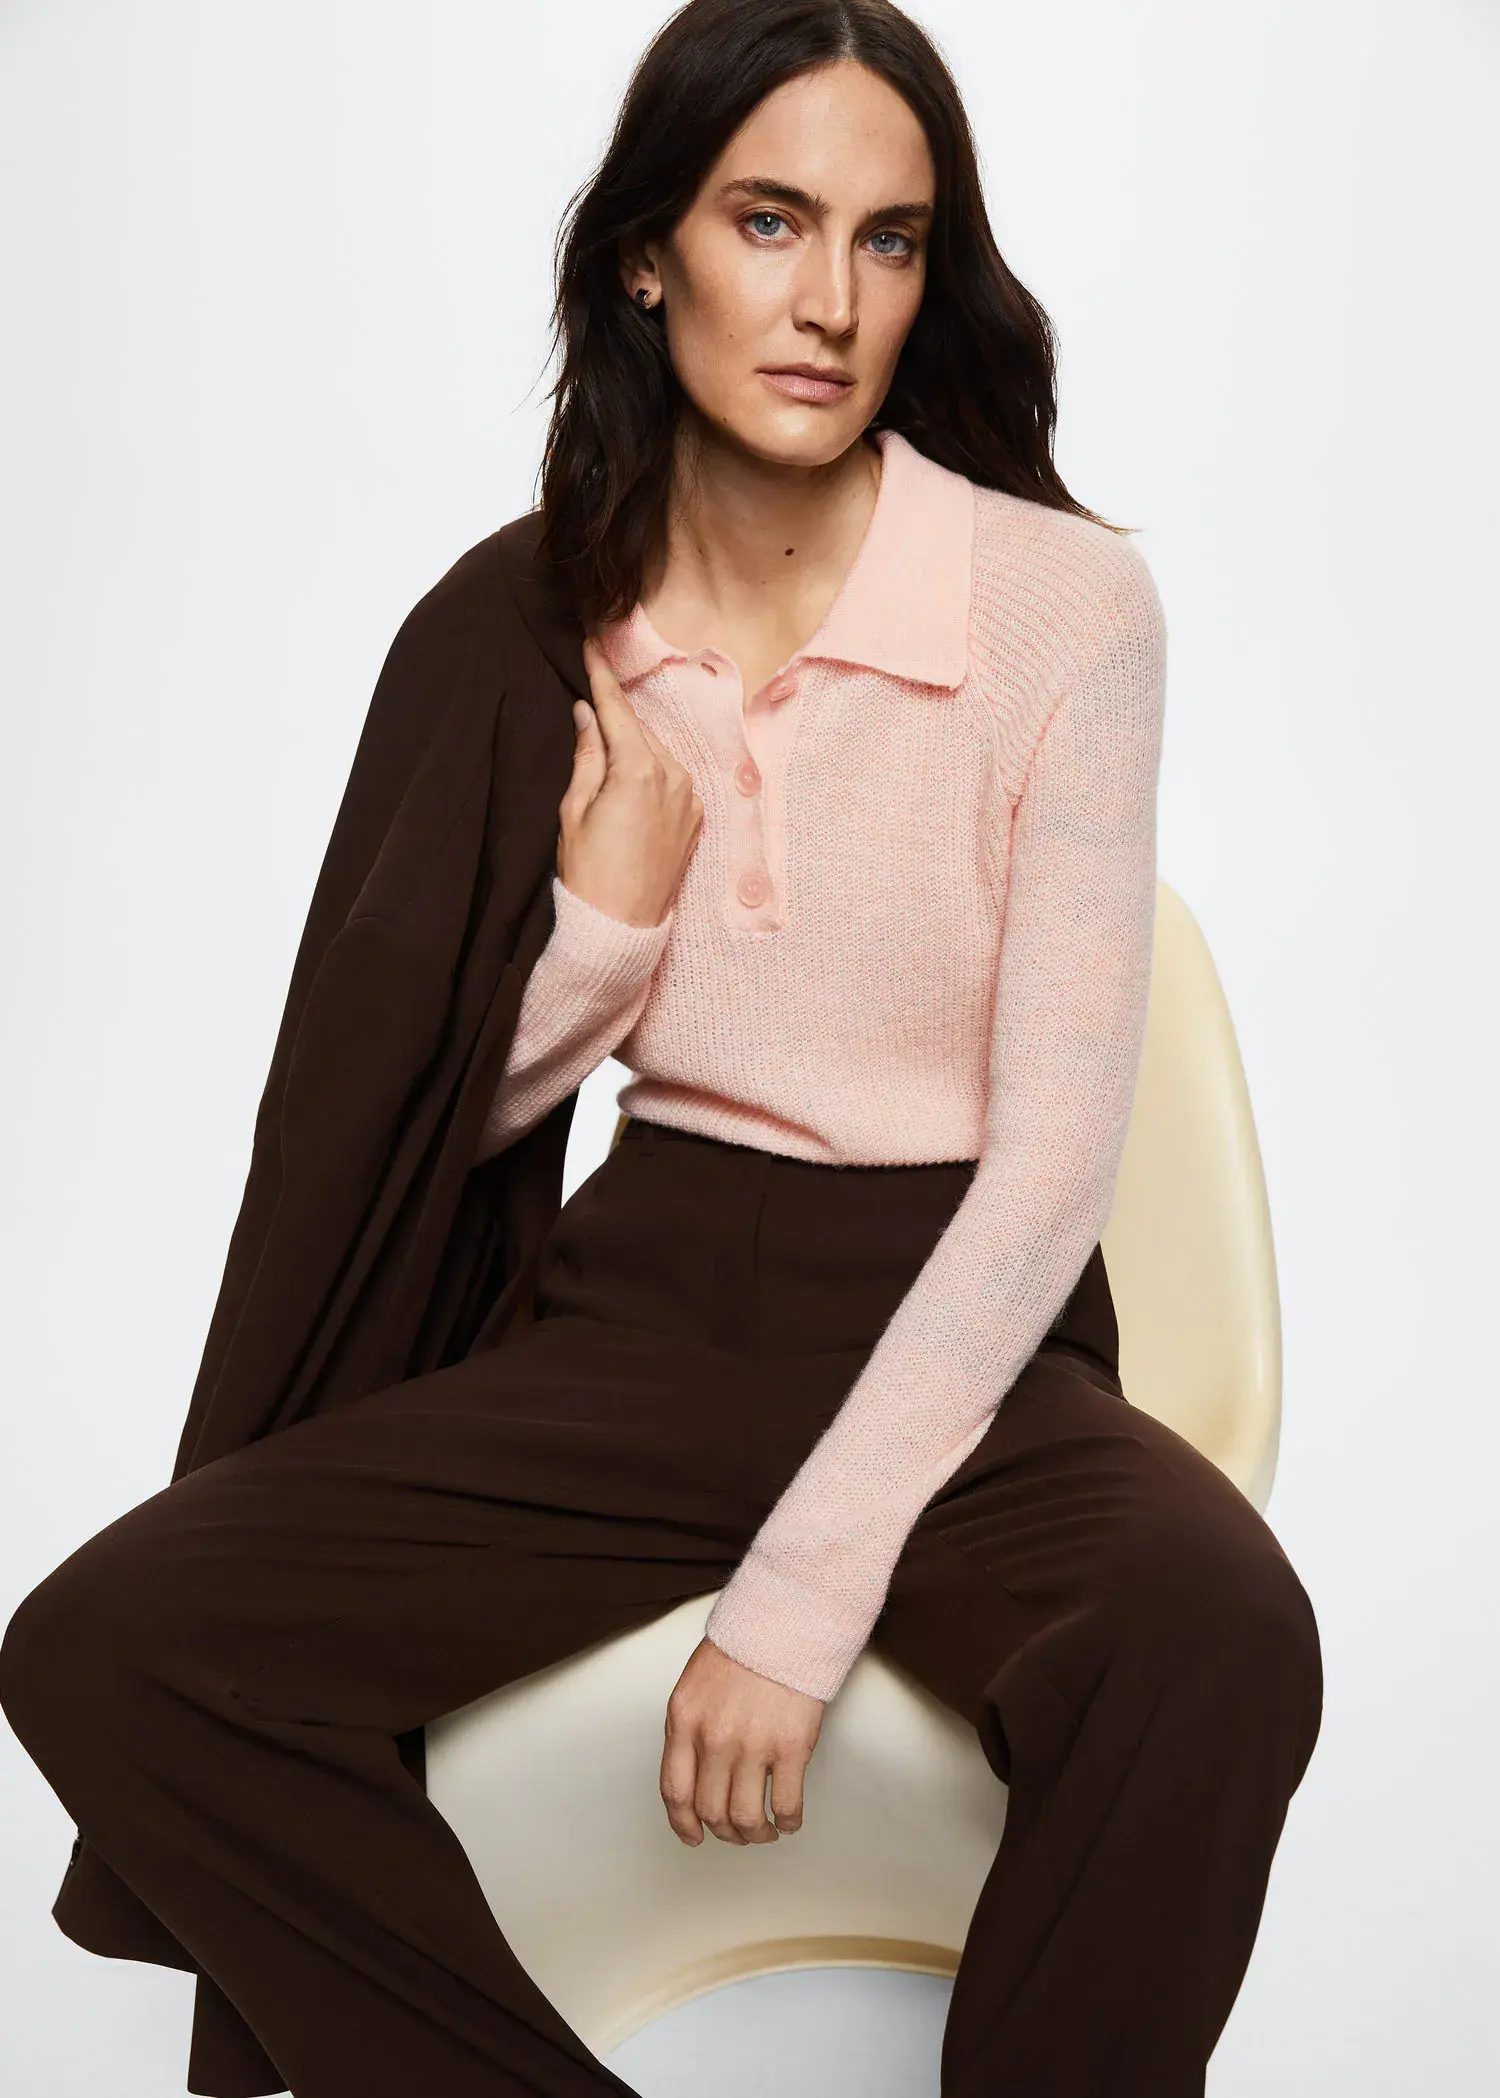 Mango Polo style sweater. a woman sitting on a chair wearing a pink sweater. 